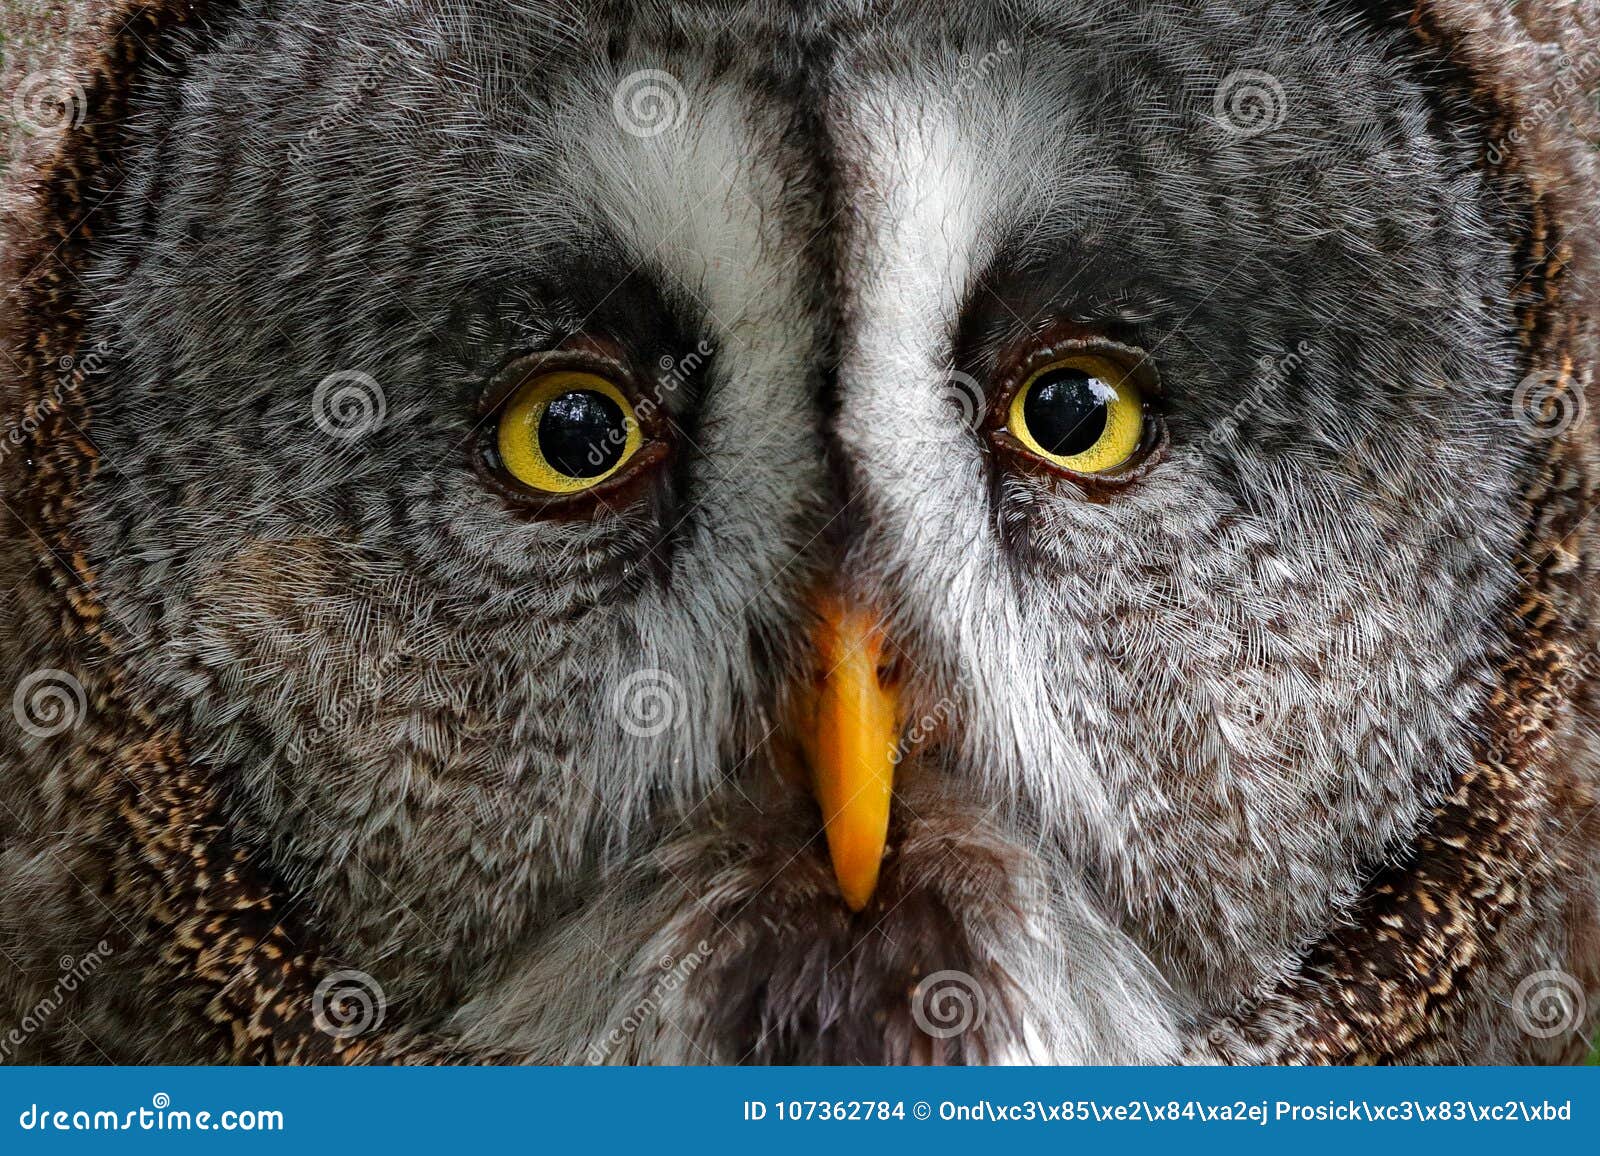 detail face portrait of owl. owl hiden in the forest. great grey owl, strix nebulosa, sitting on old tree trunk with grass, portra